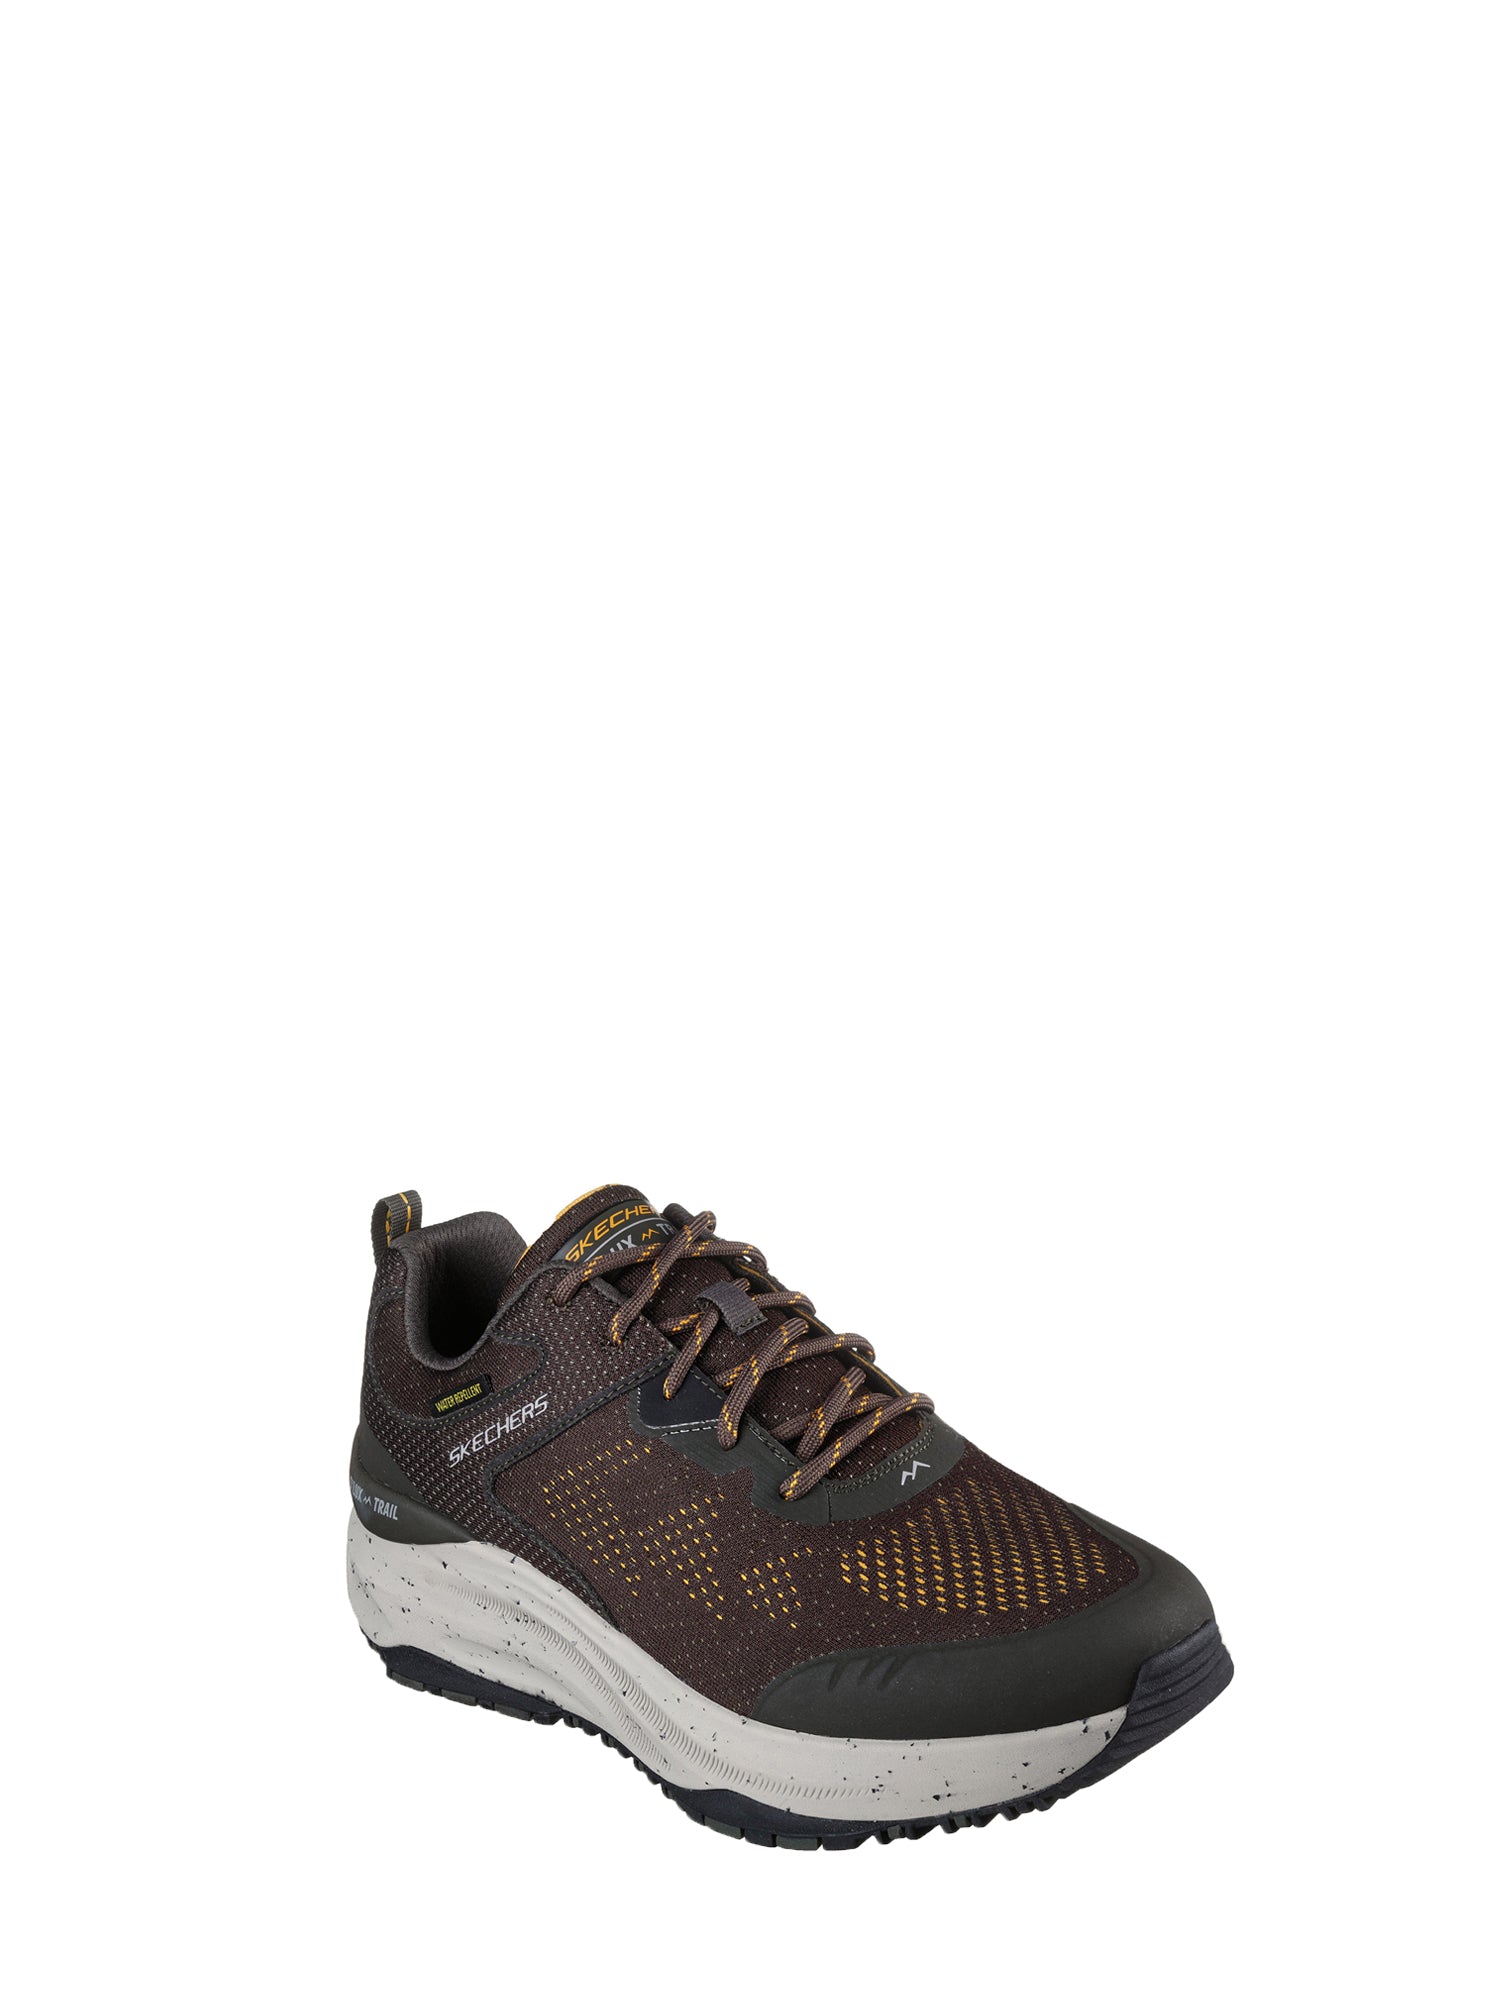 SKECHERS SNEAKERS RELAXED FIT - D'LUX TRAIL OLIVA